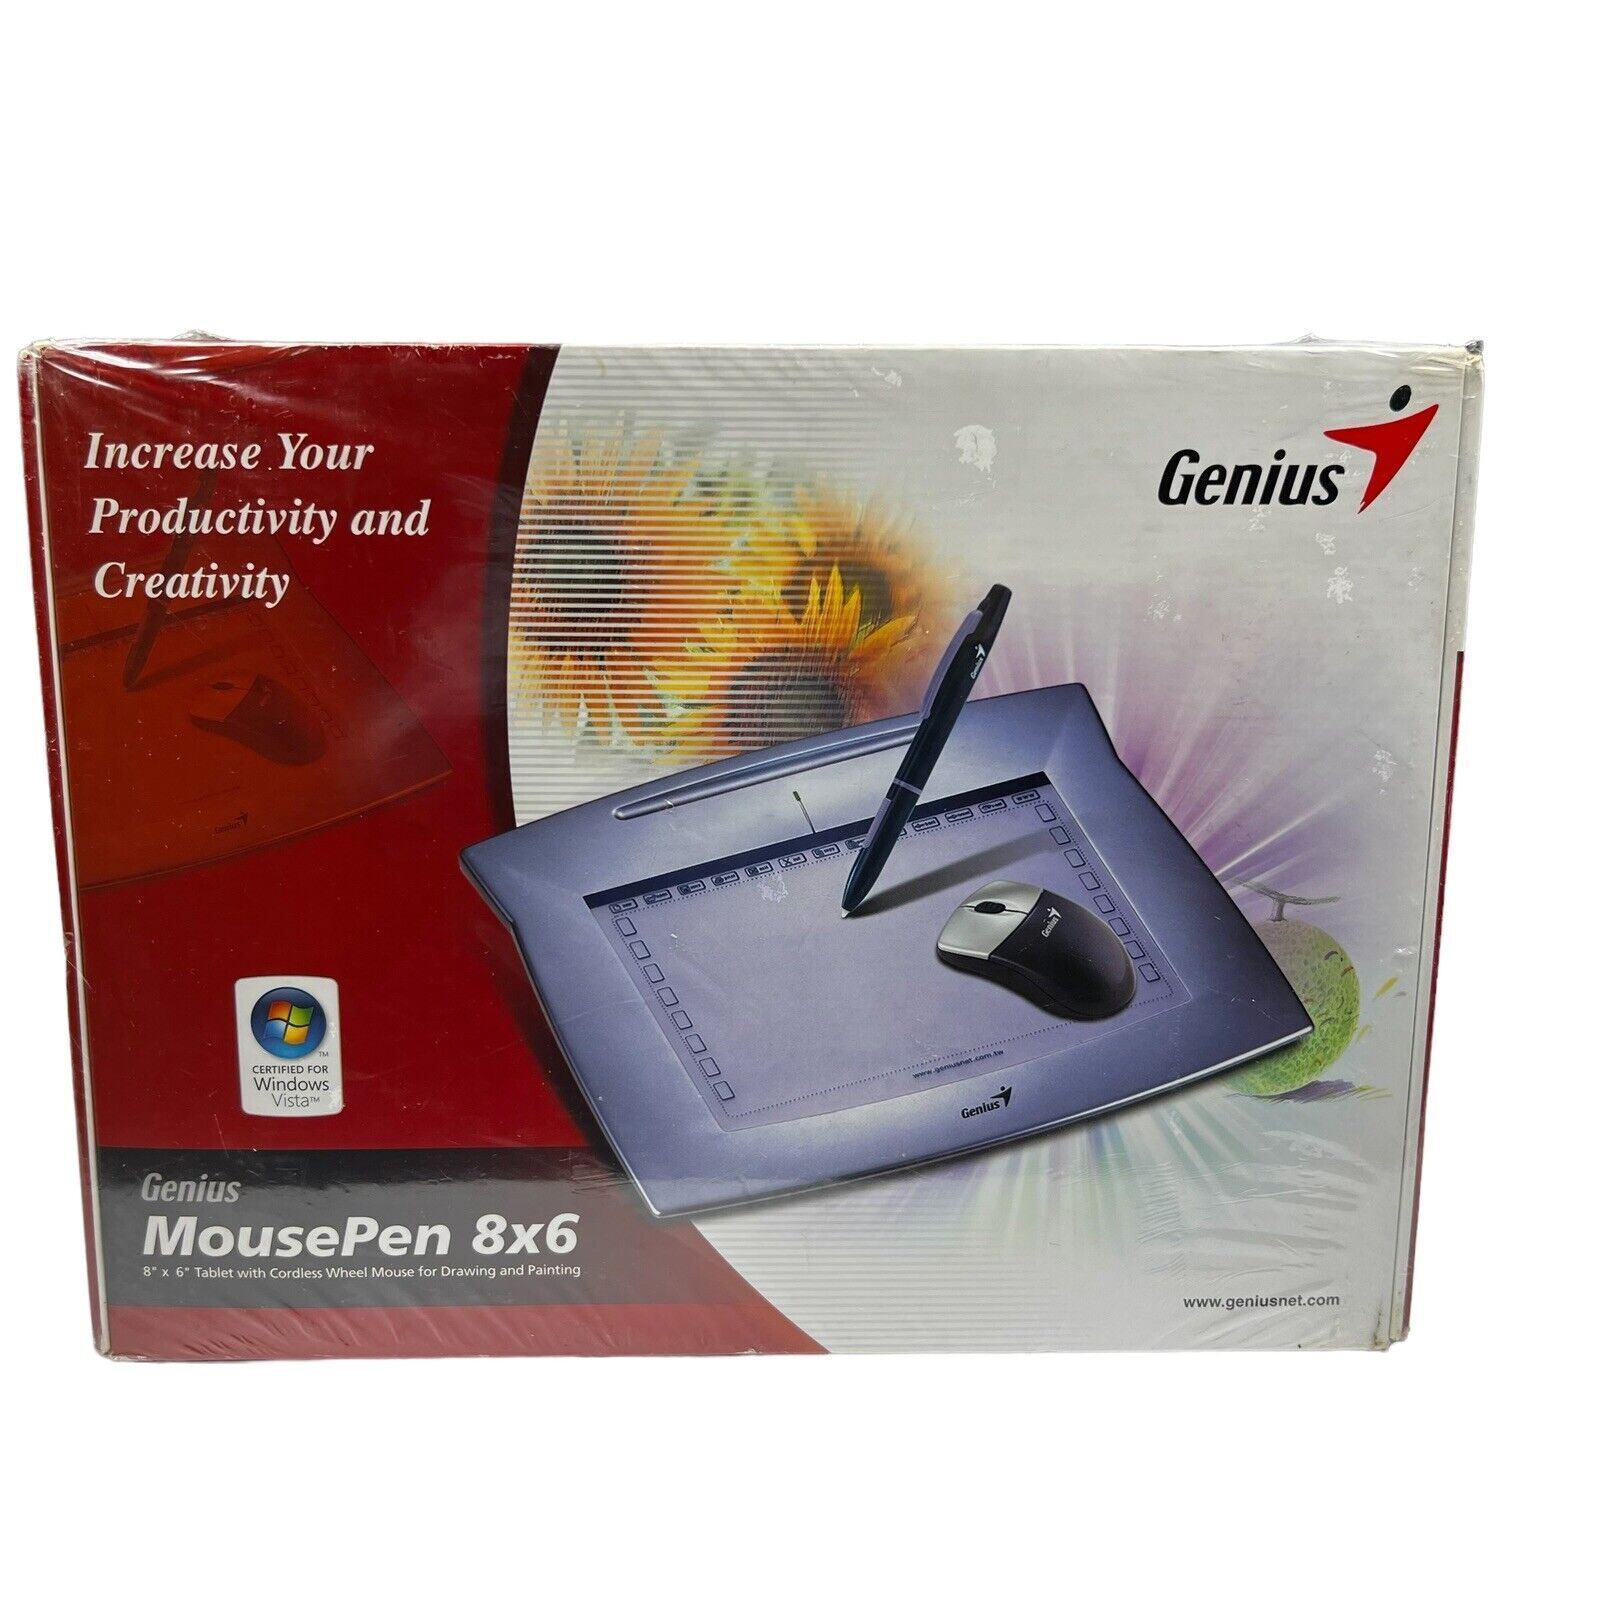 NEW Genius MousePen 8x6 Tablet With Cordless Wheel Mouse for Drawing & Painting